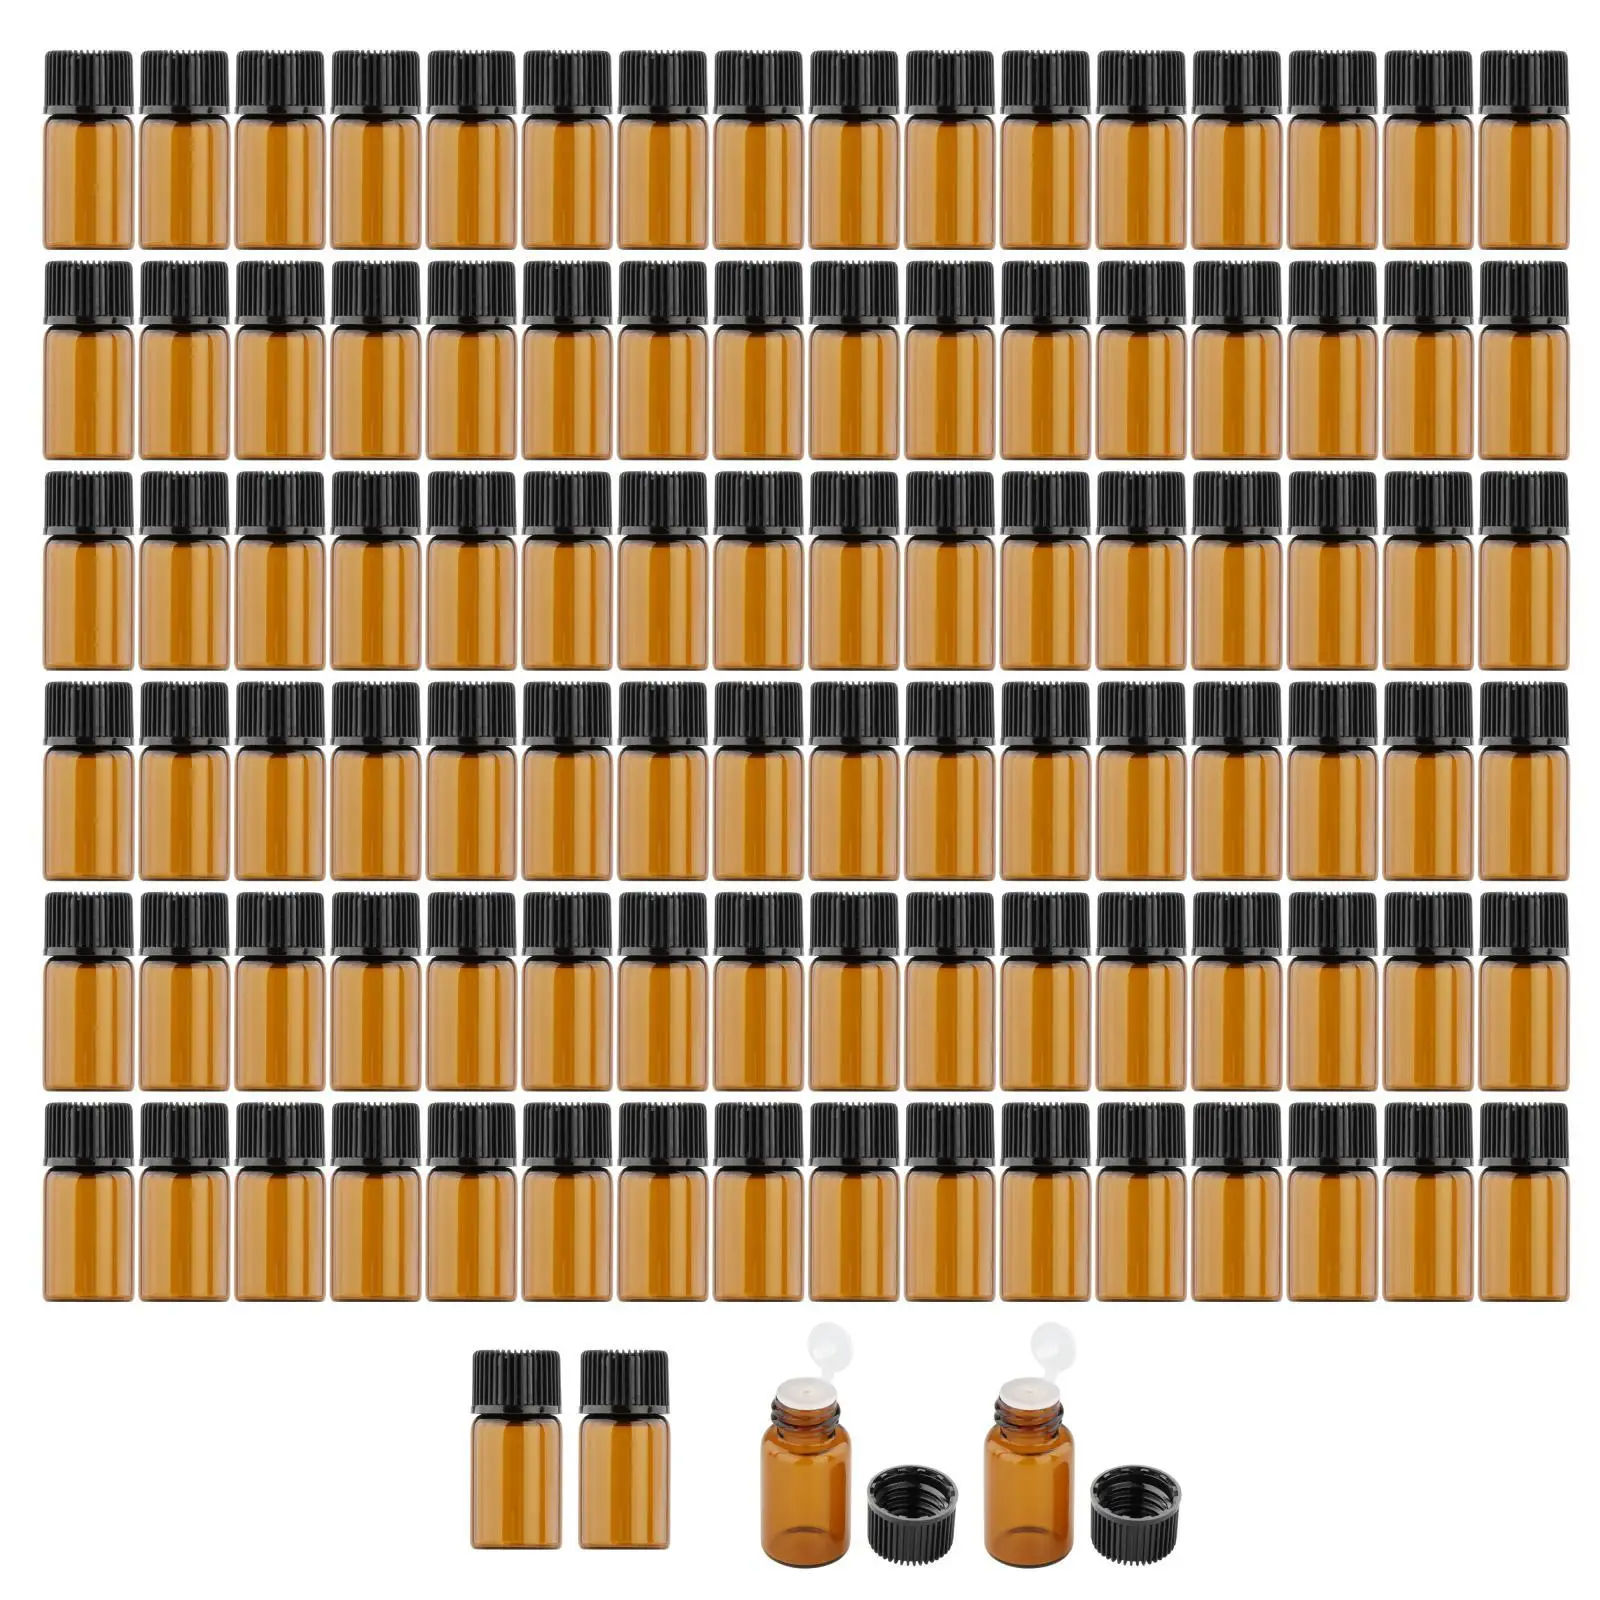 100 Pieces Amber Mini Glass Bottle Refillable for Perfume Chemical Liquid